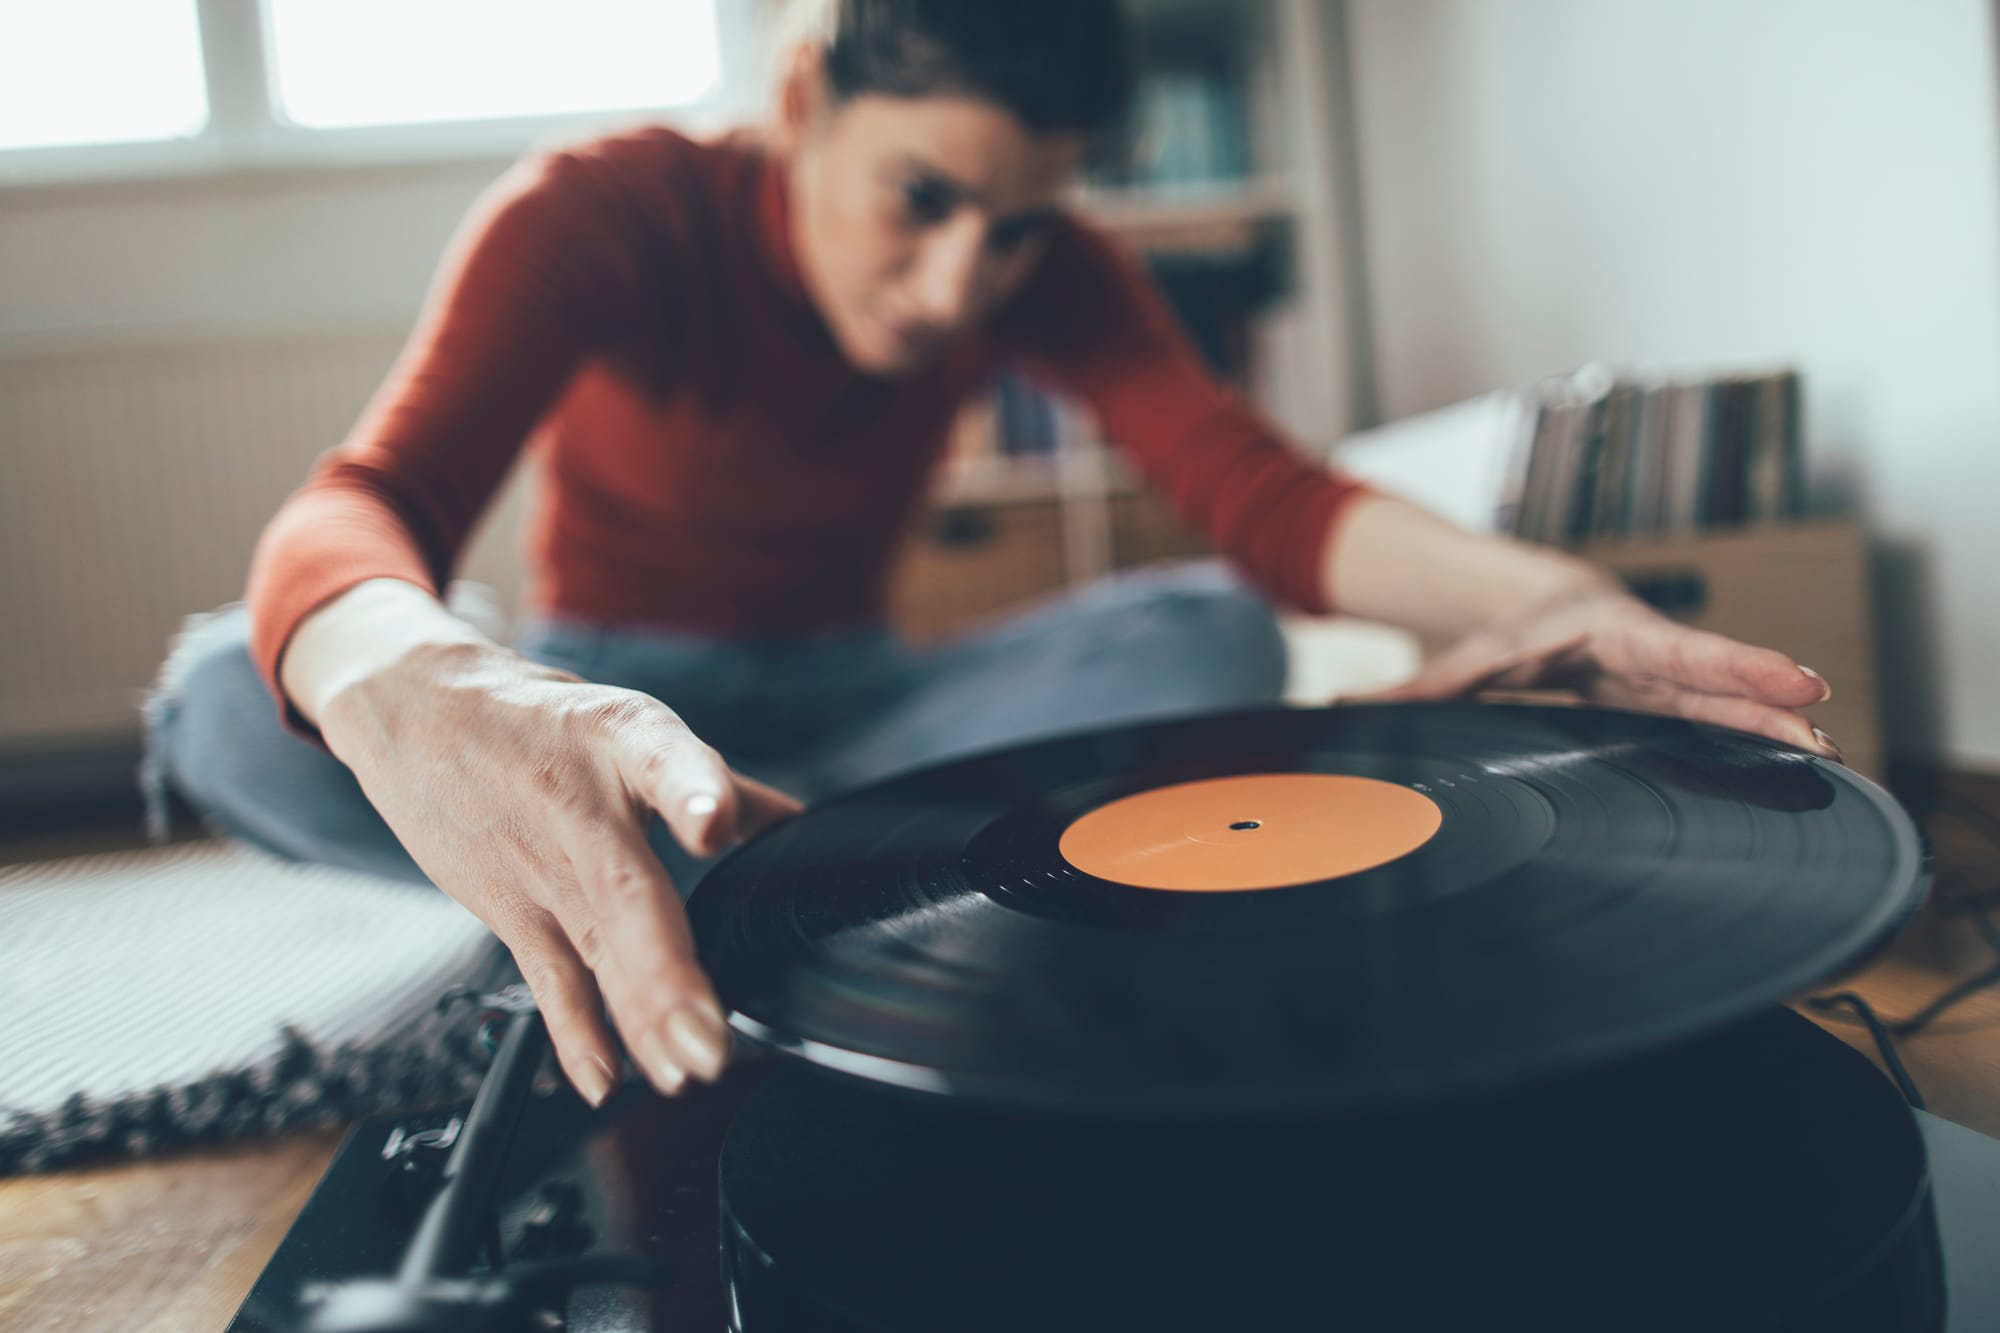 A Rough Guide To: Why Is My Vinyl Record Skipping?